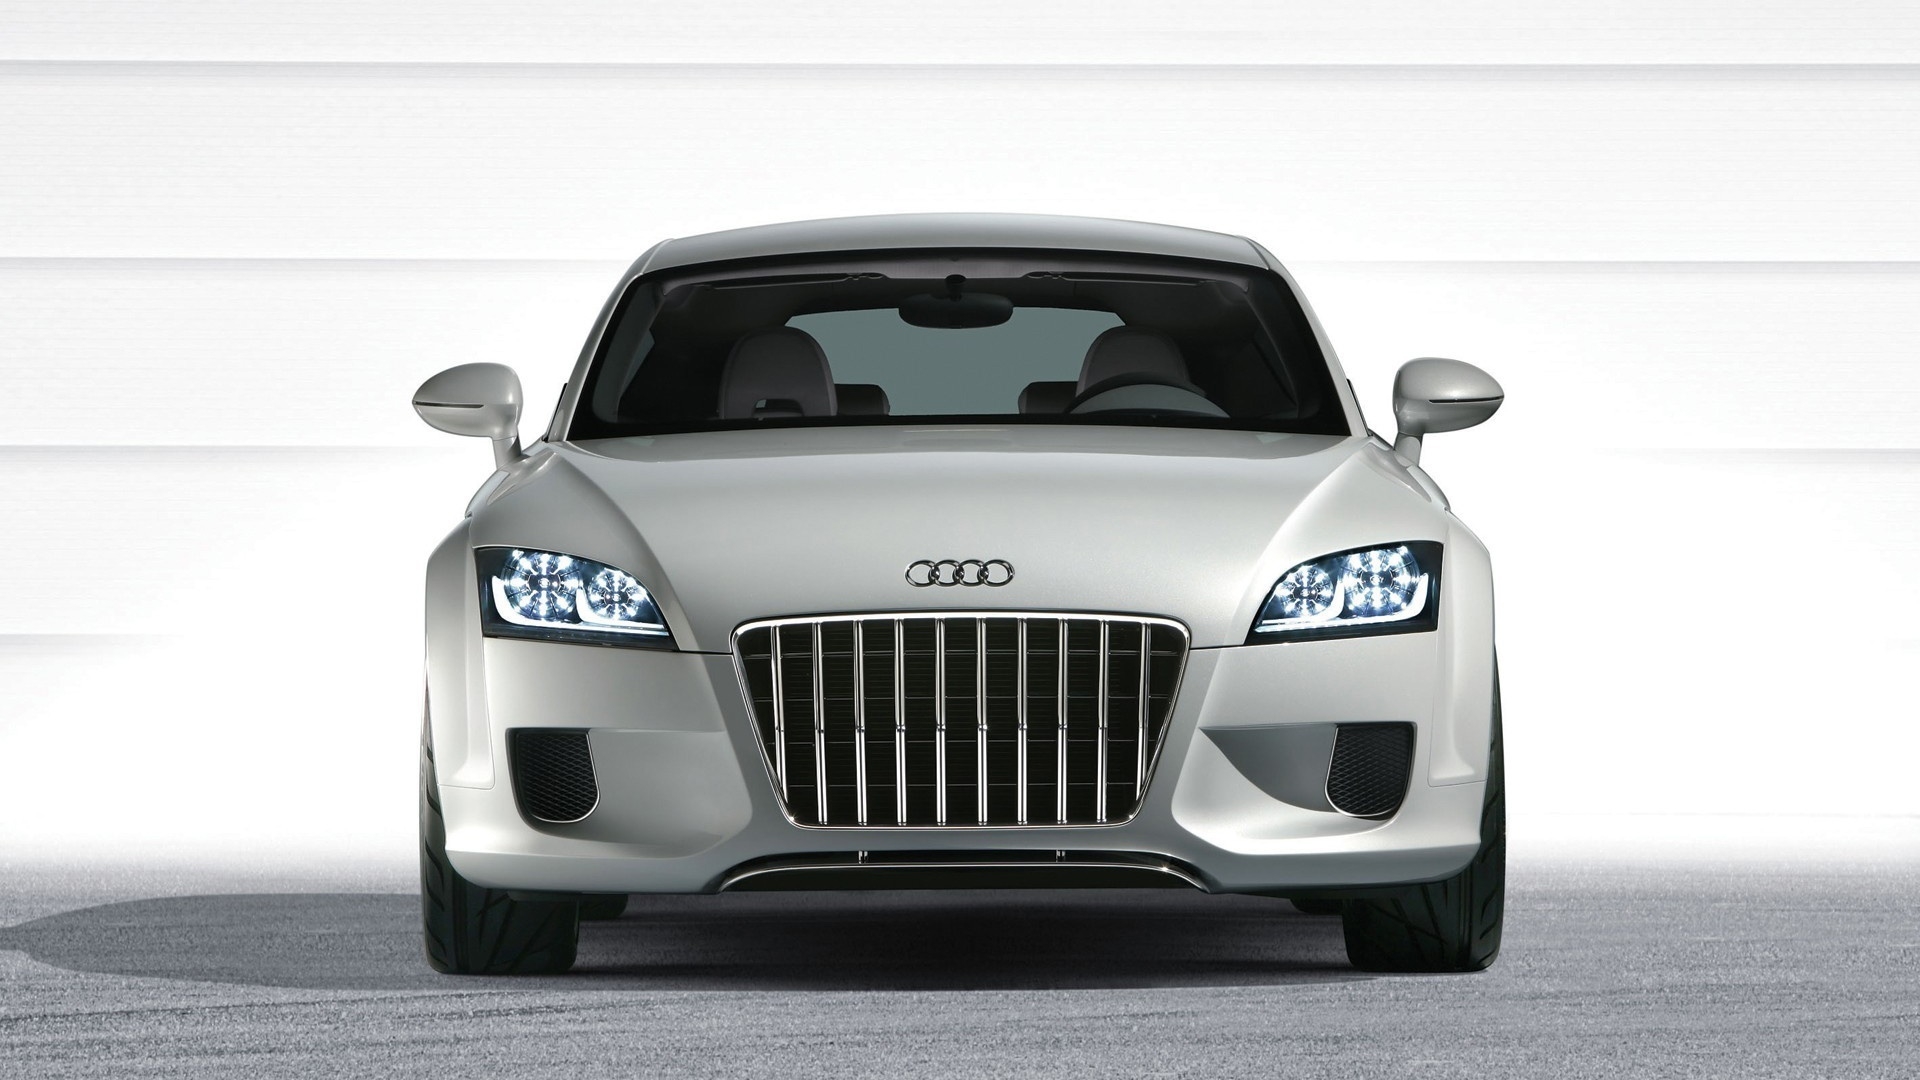 Audi A1 Concept Front for 1920 x 1080 HDTV 1080p resolution